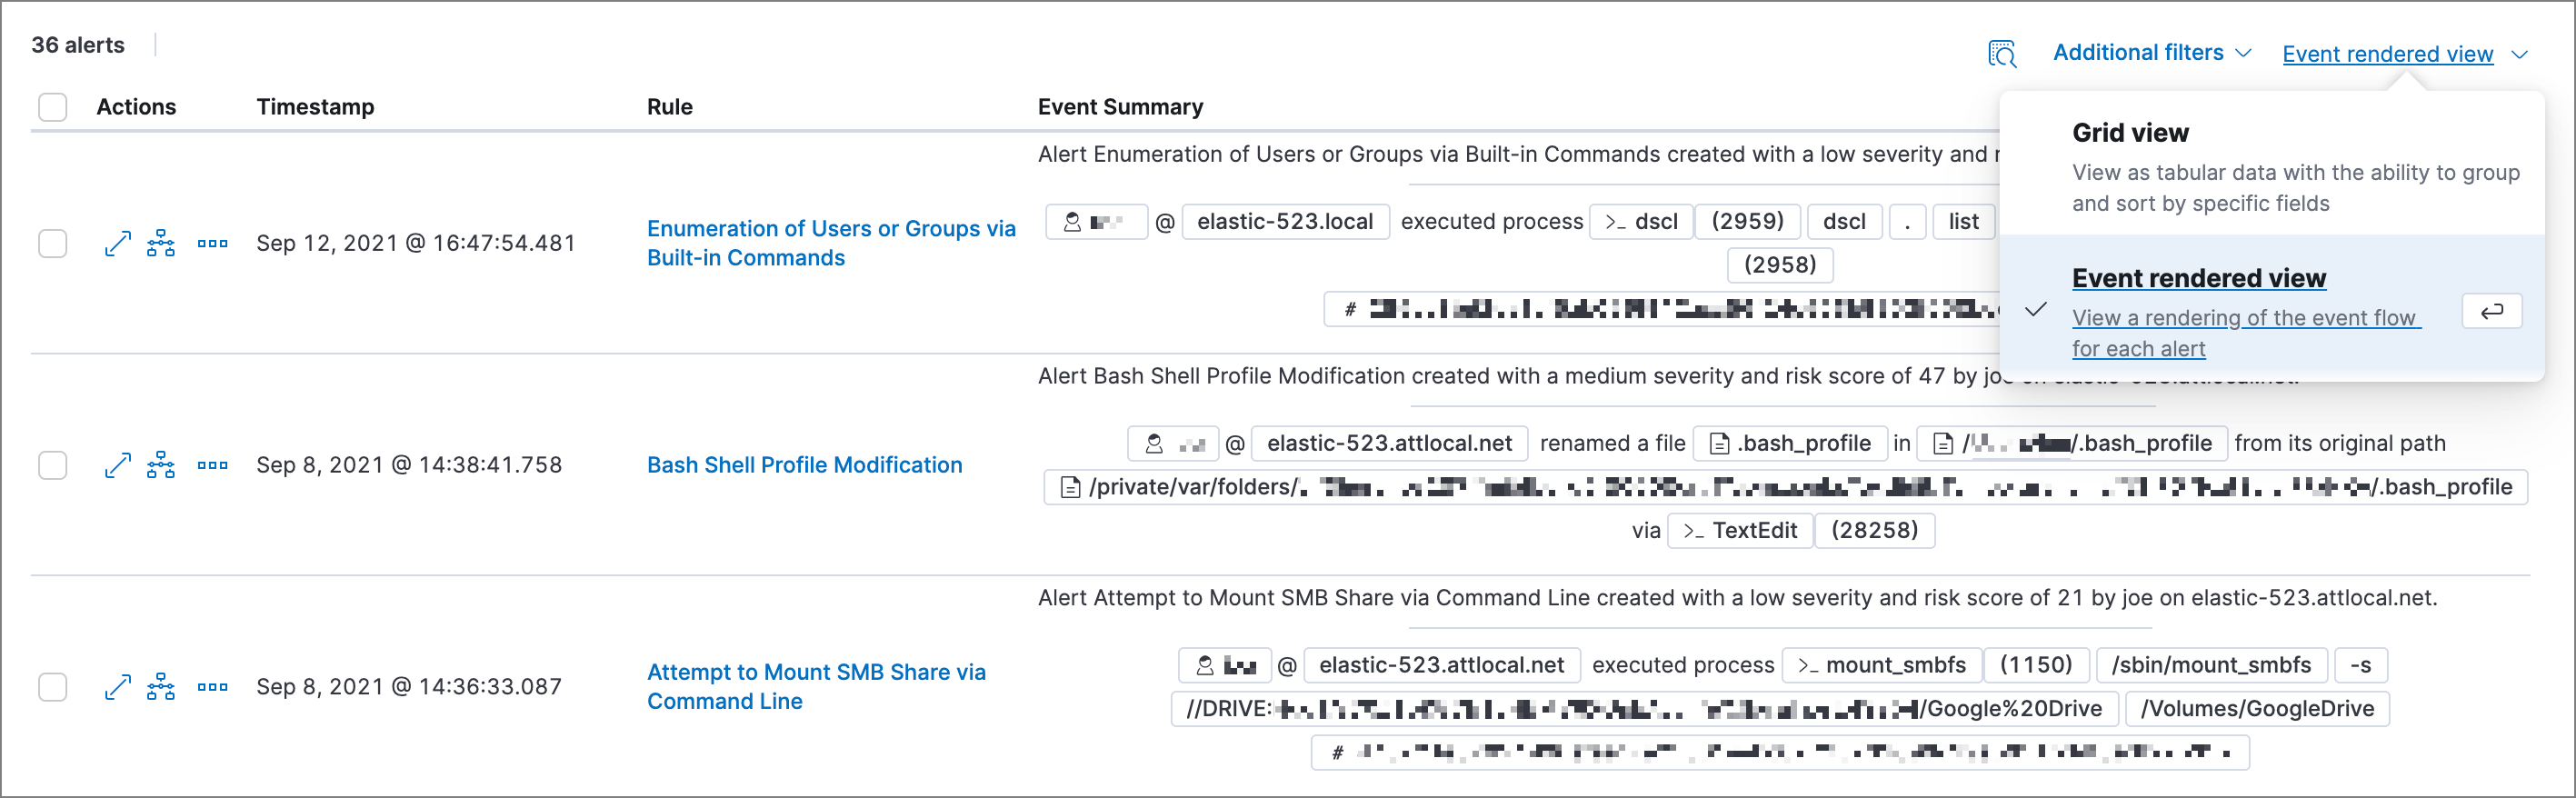 Shows the Alerts table with the Event rendered view enabled